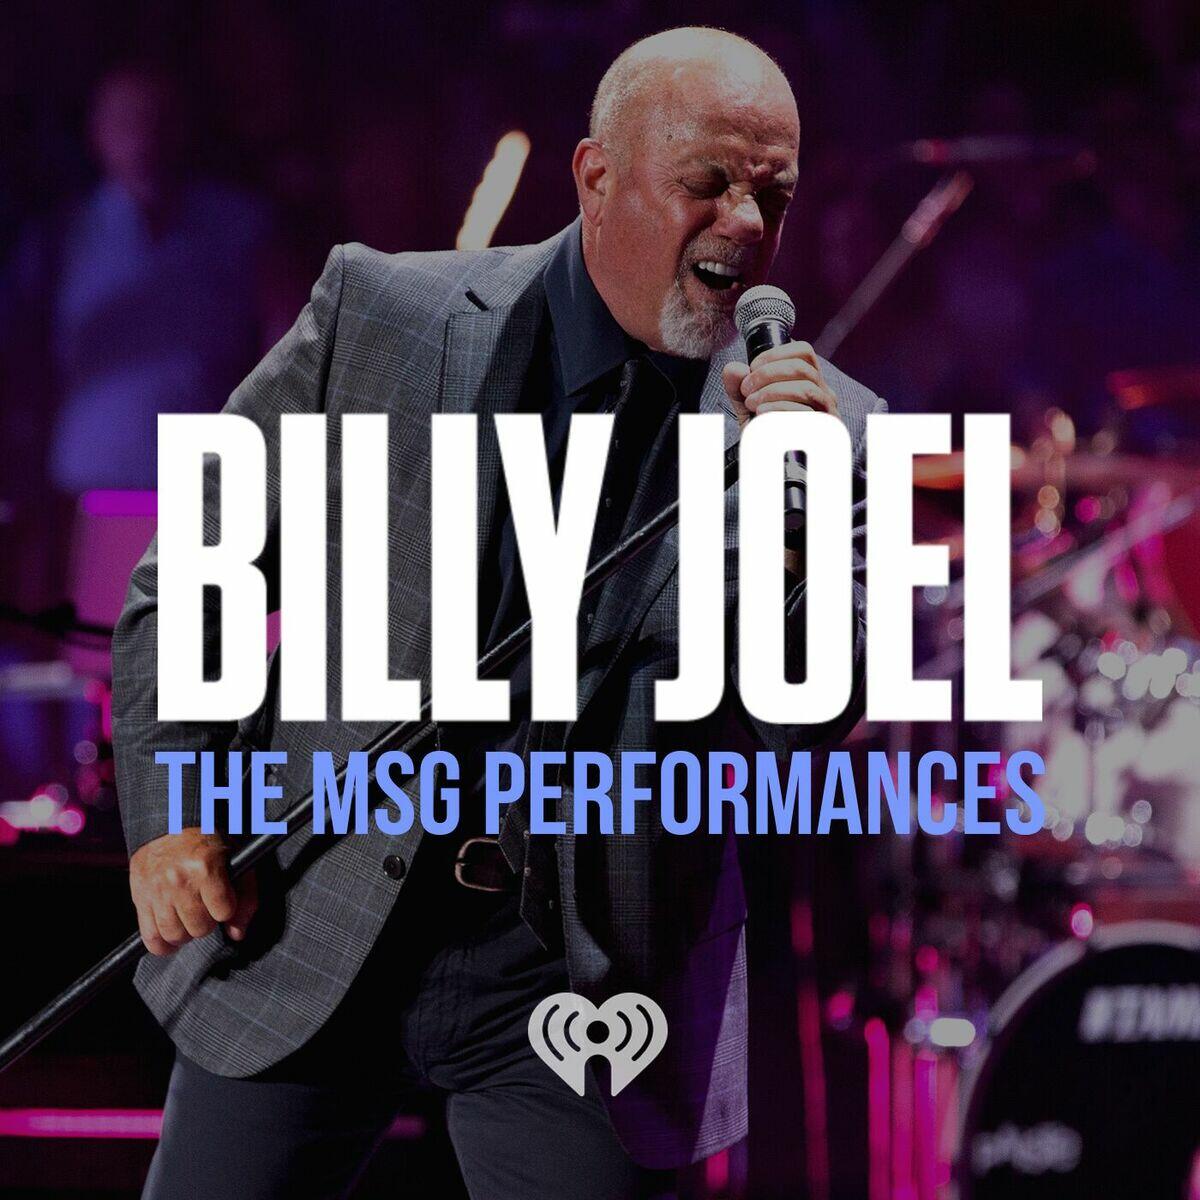 Billy Joel The MSG Performances iHeart